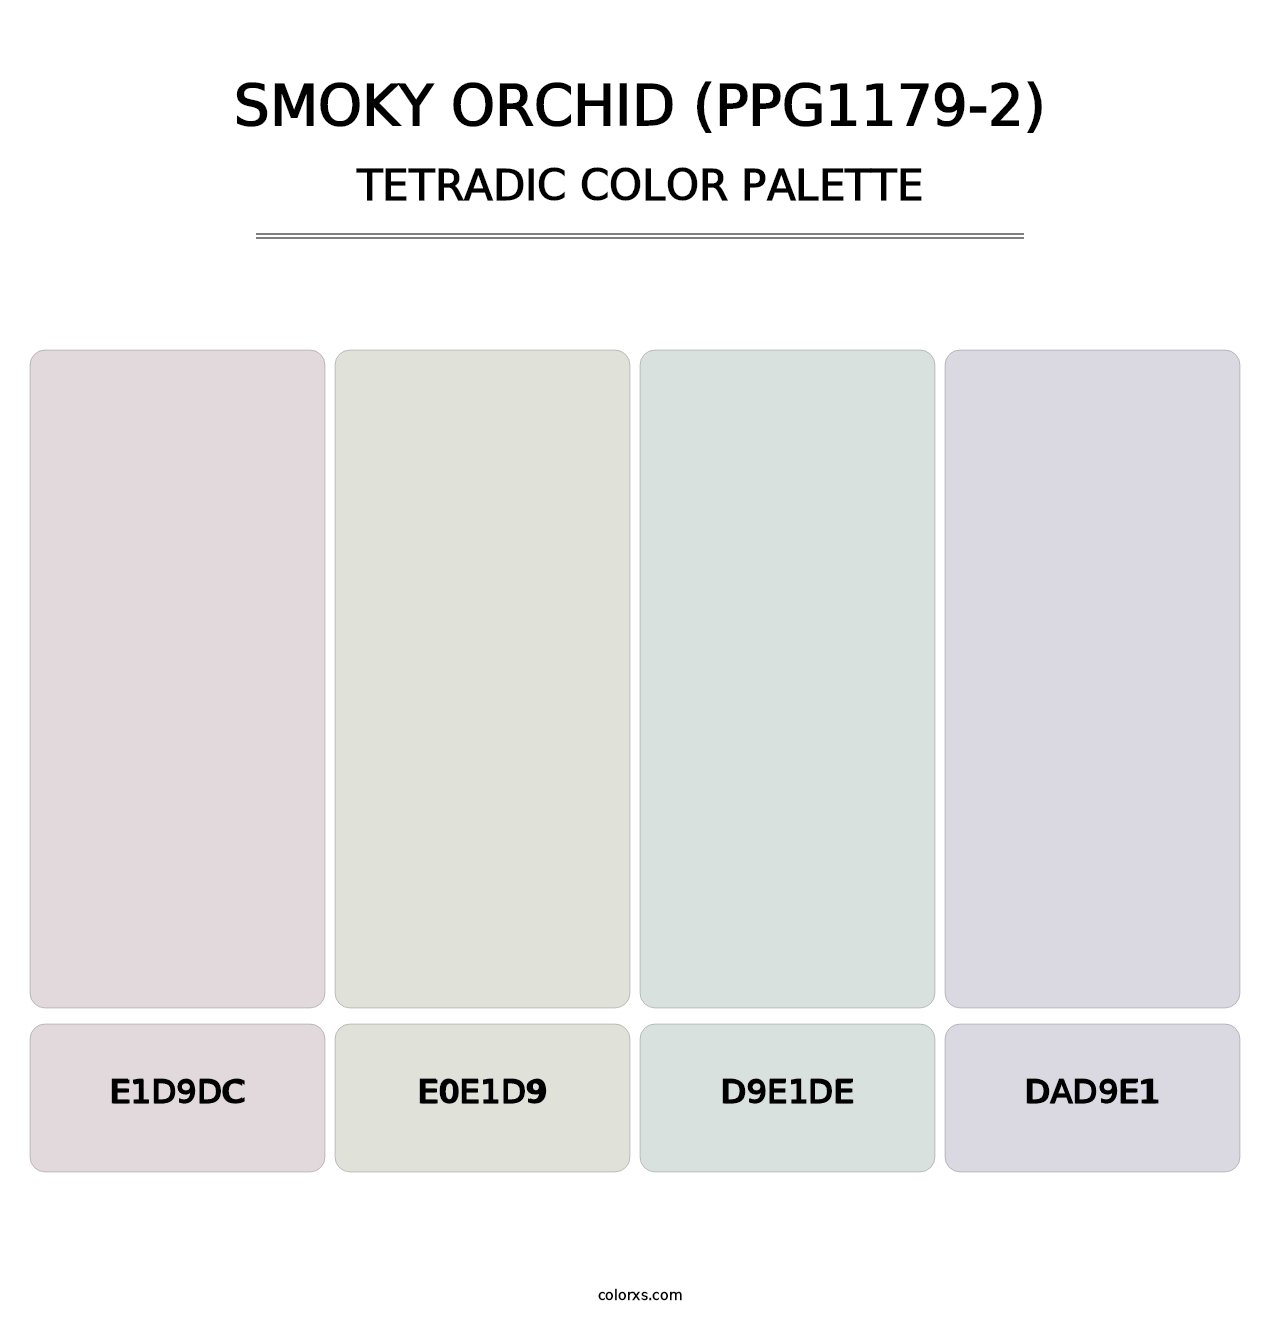 Smoky Orchid (PPG1179-2) - Tetradic Color Palette